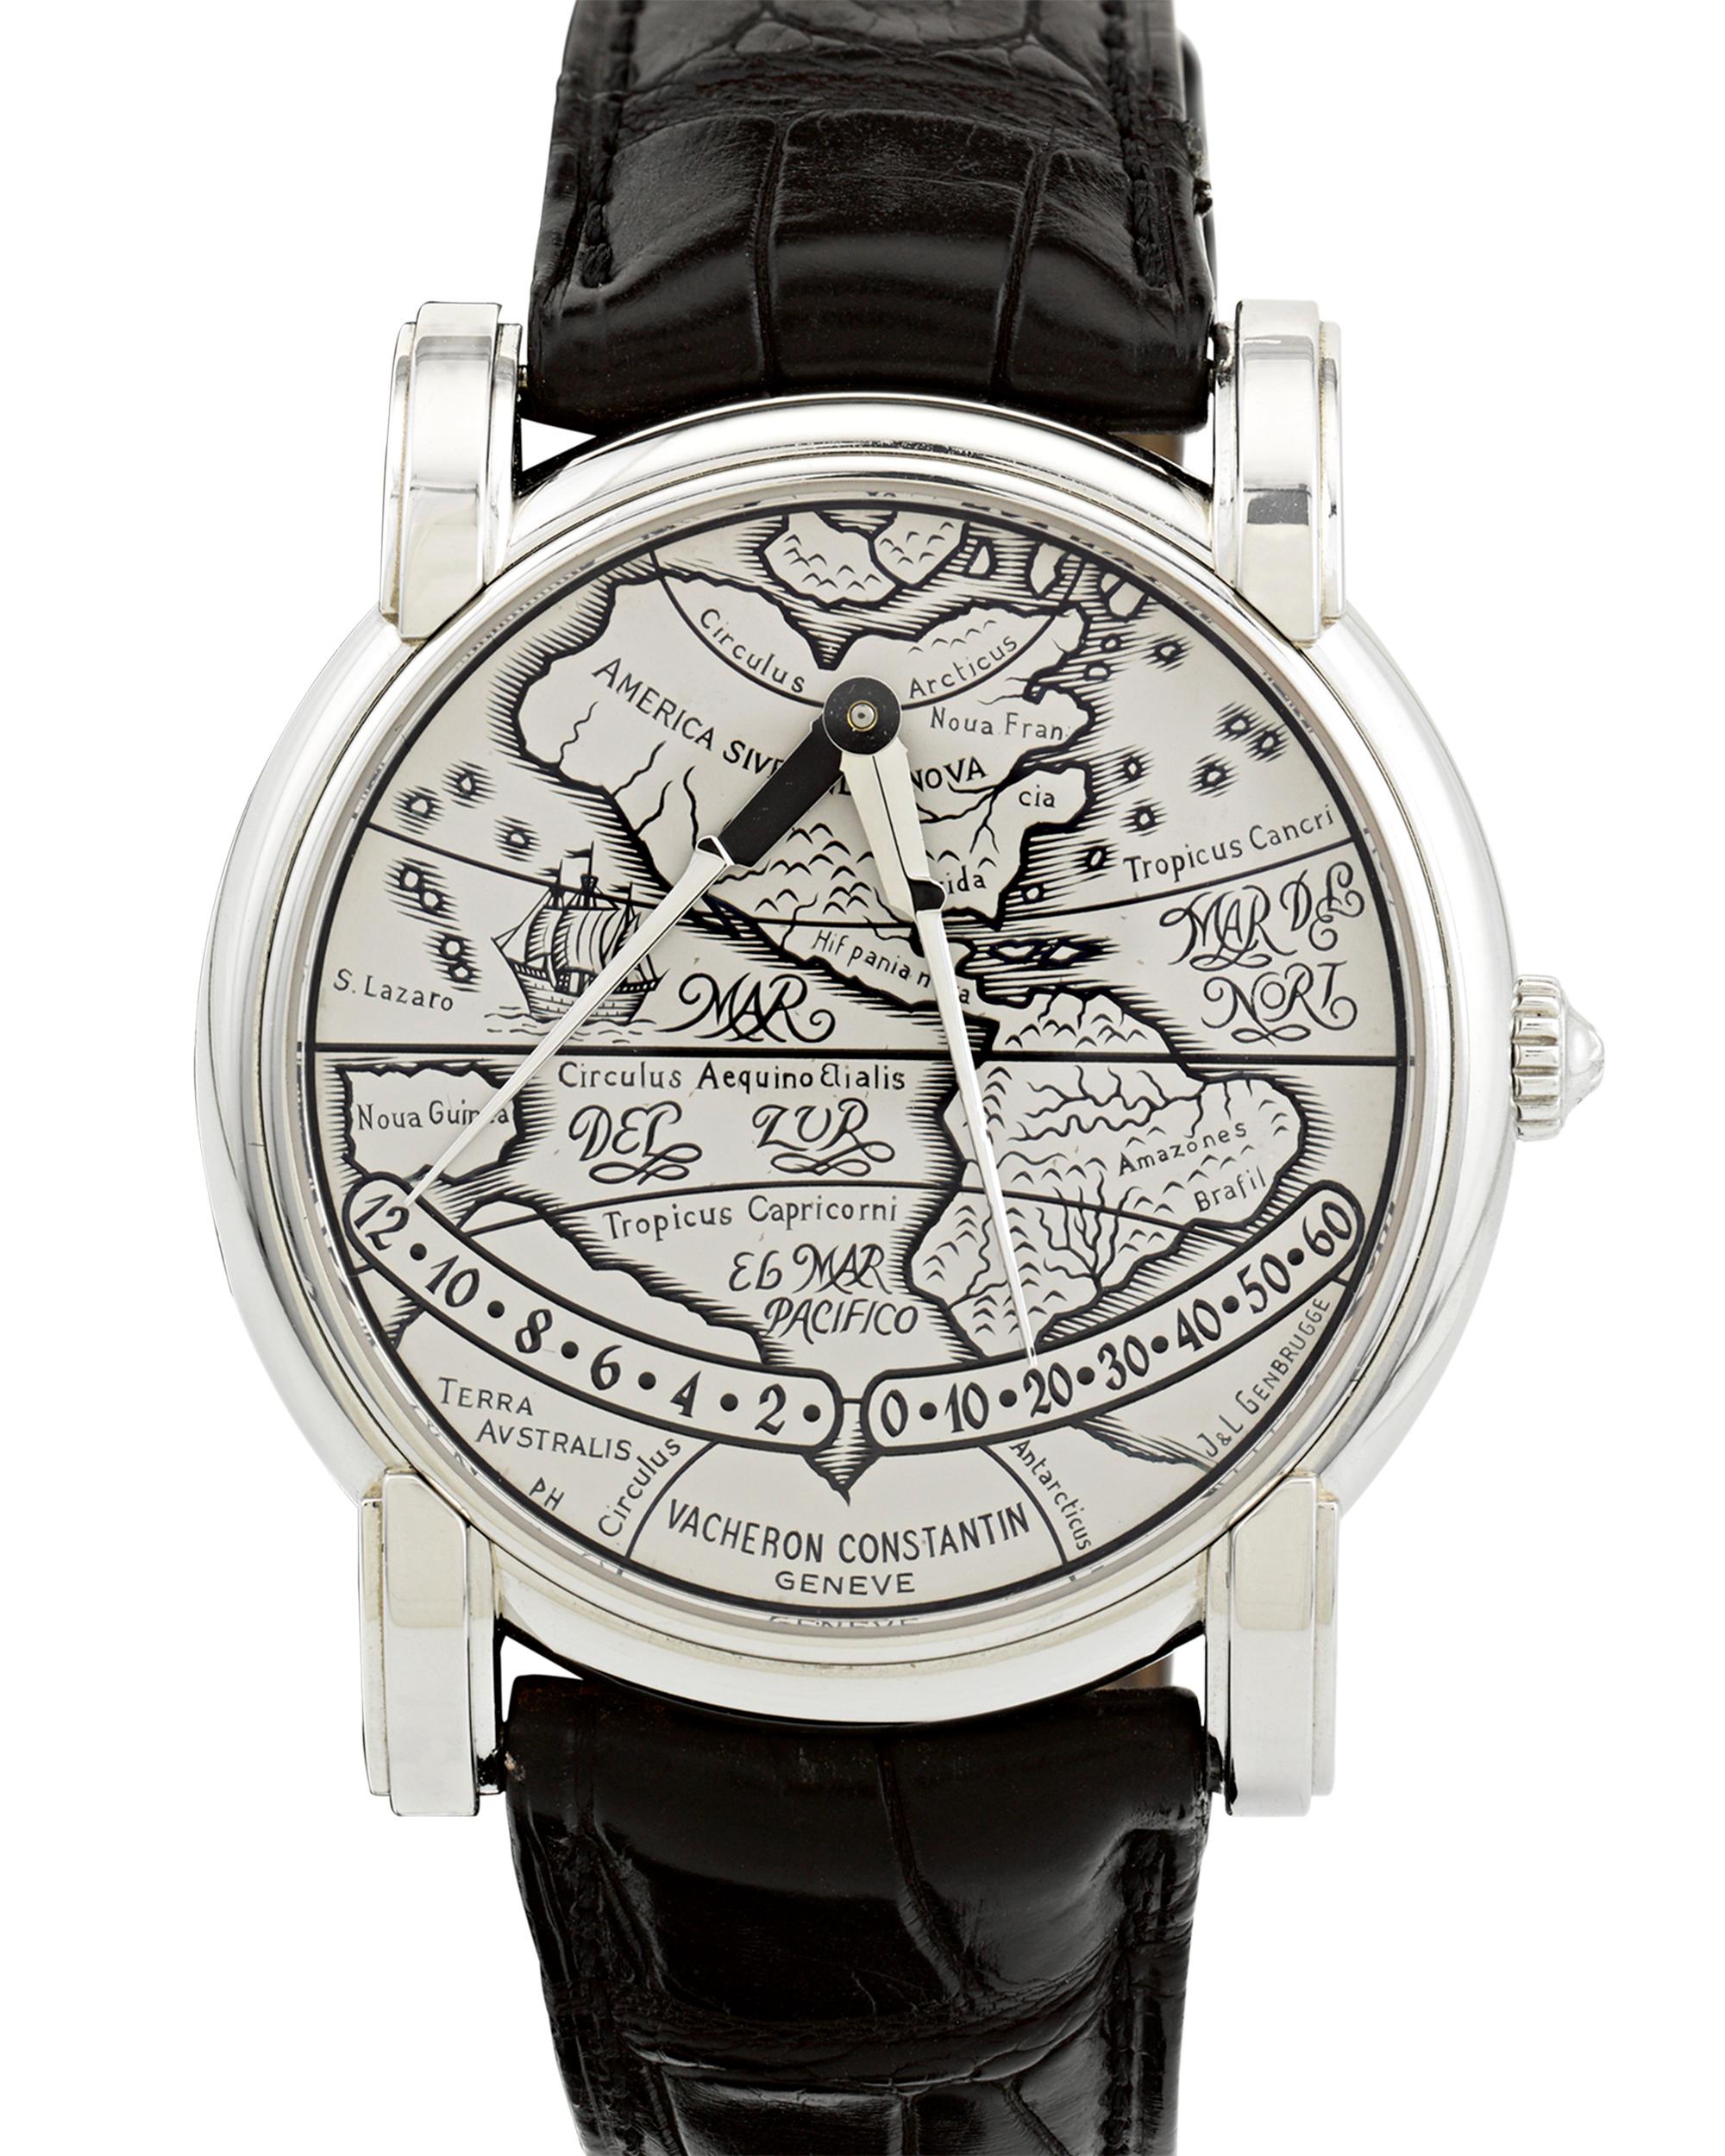 This rare wristwatch by the famed Swiss firm of Vacheron Constantin hails from the watchmakers' highly celebrated Mercator line of watches. The iconic collection was named for the mathematician, geographer, and master cartographer Gerhard Kremer,